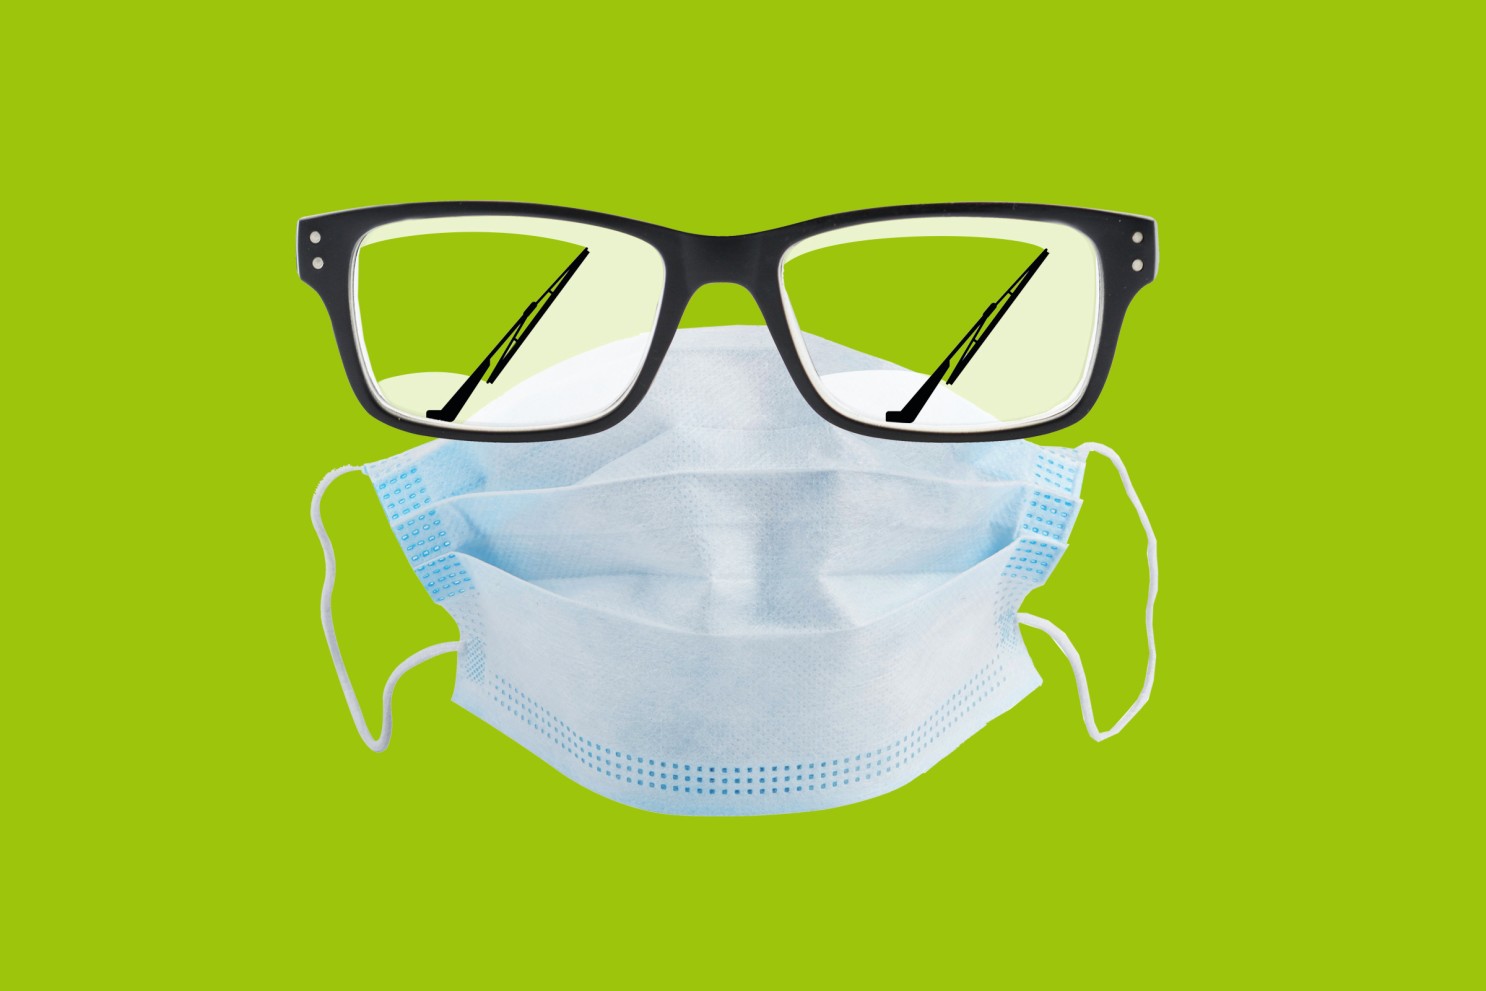 Face Masks Can Prove Tricky for Those With Eyeglasses - Beyer Eye